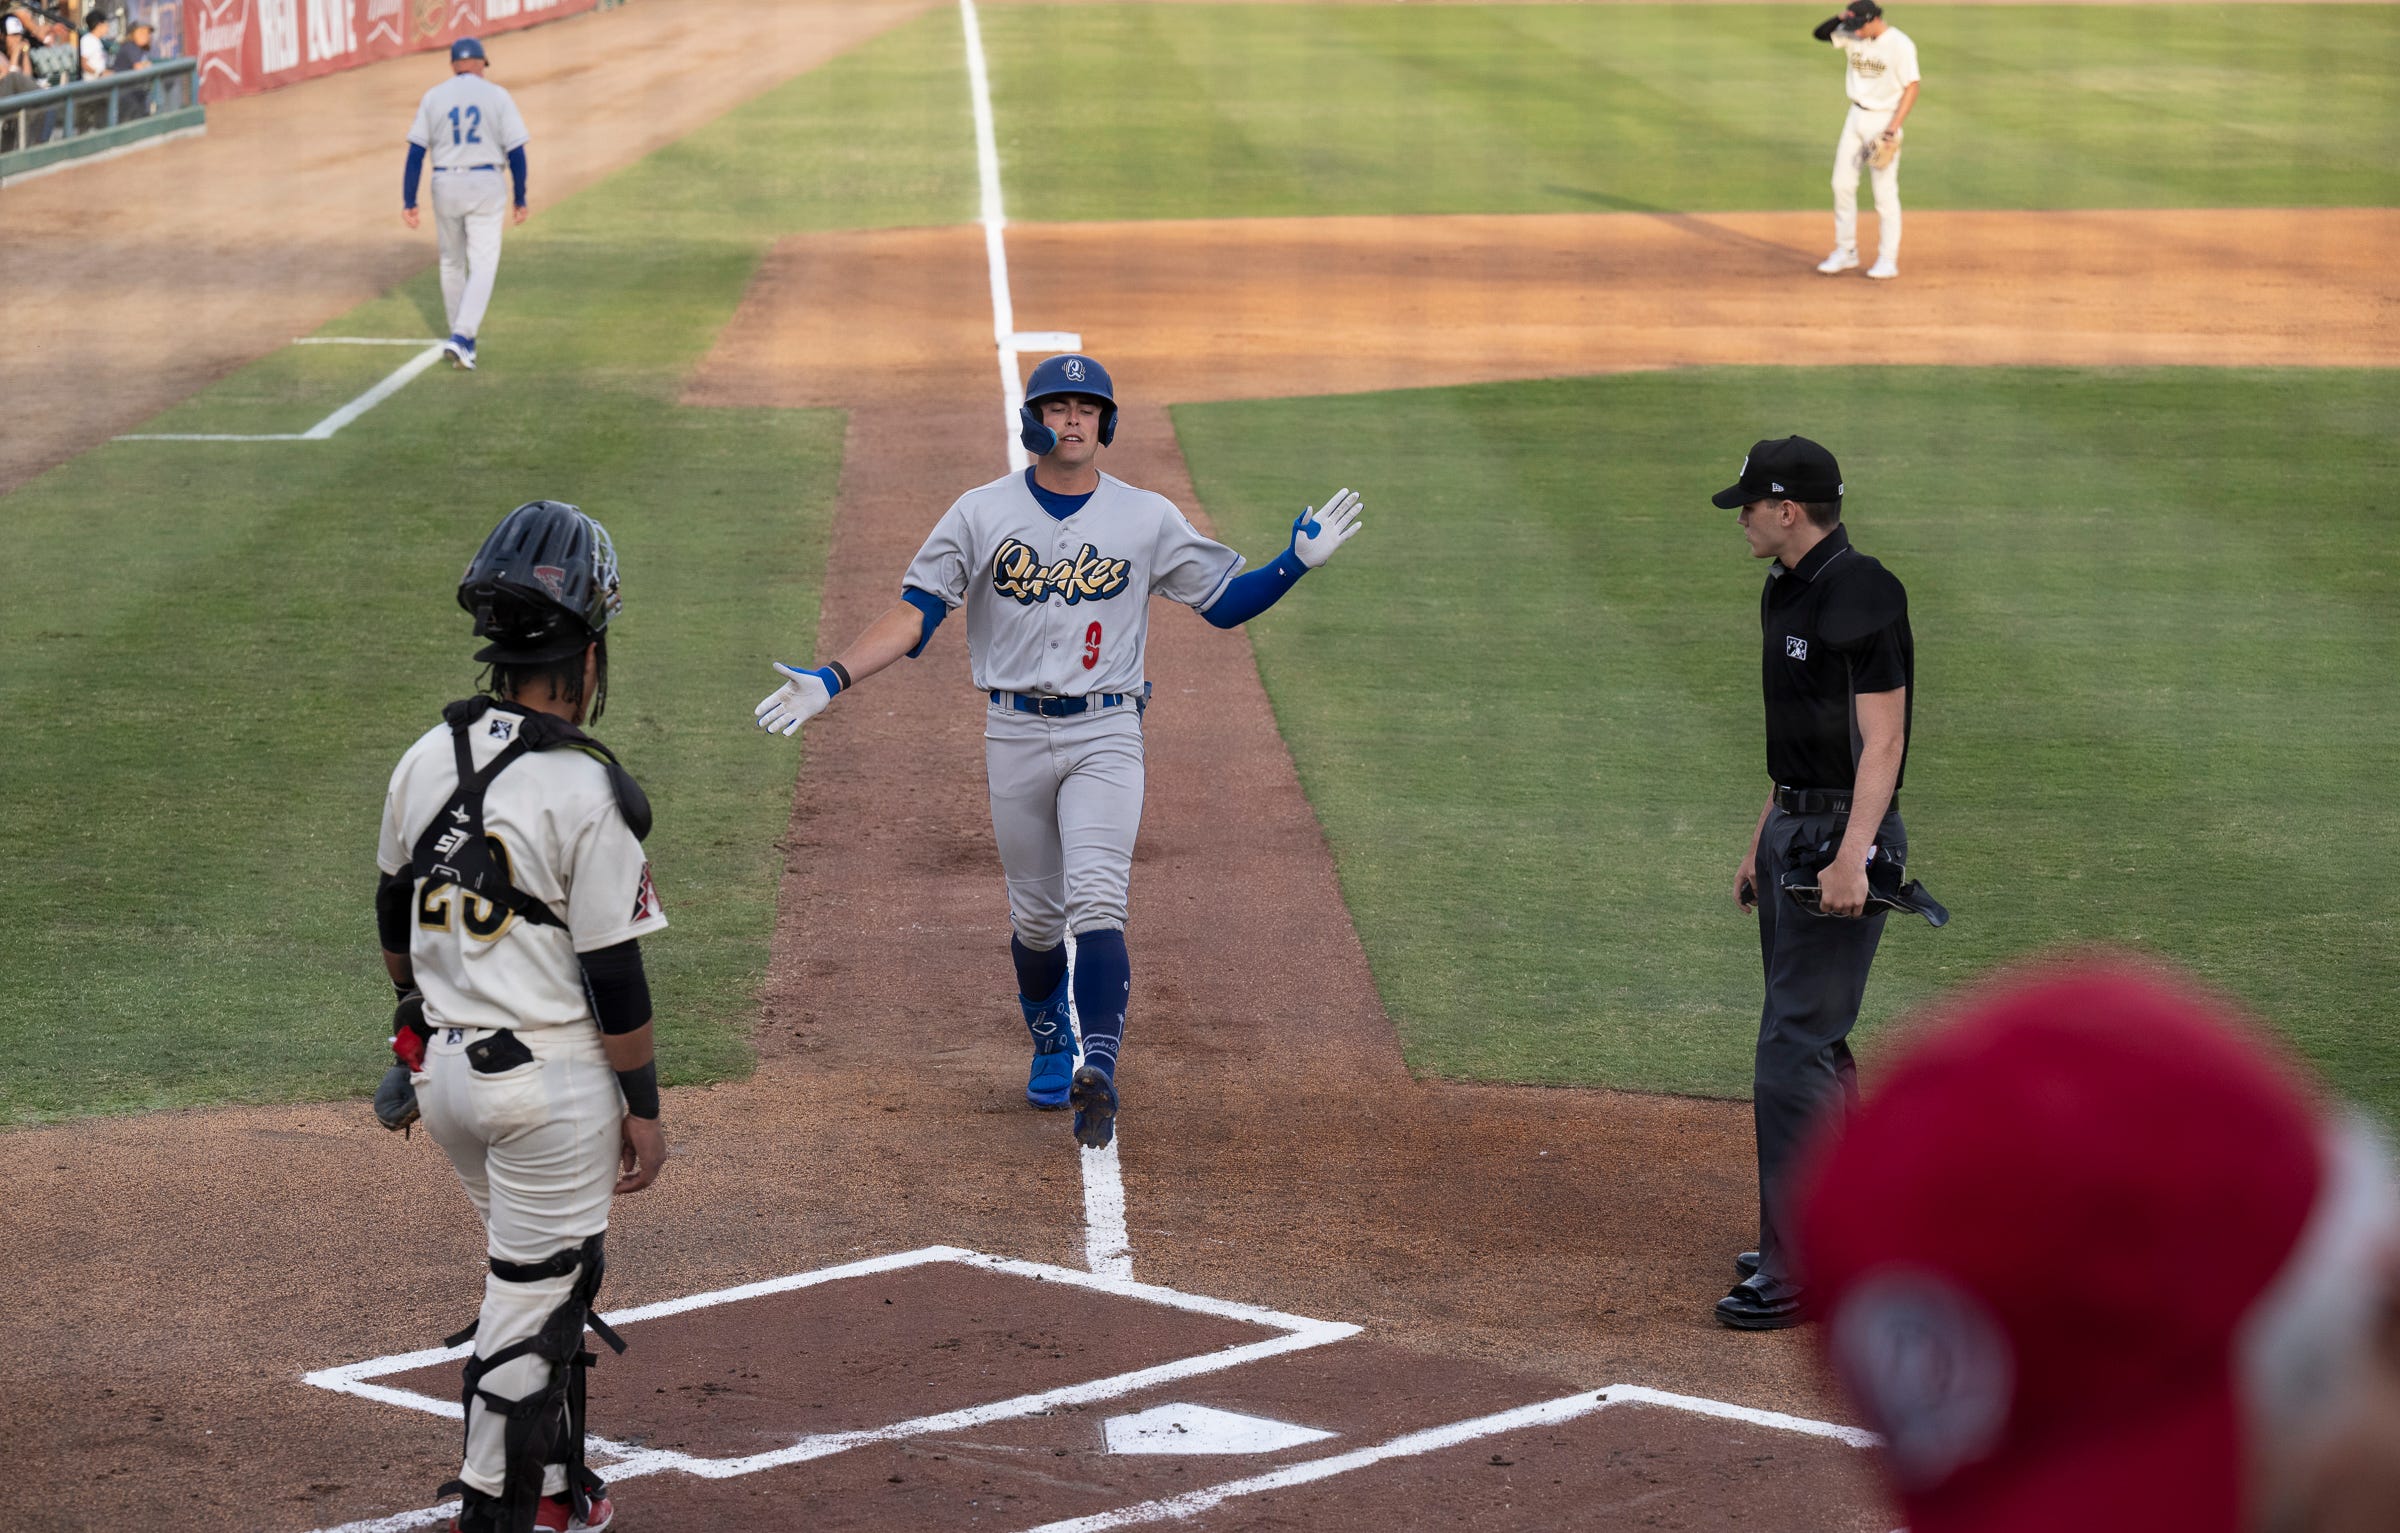 Rancho Cucamonga Chris Newell scores against Visalia Rawhide during the home opener Tuesday, April 11, 2023